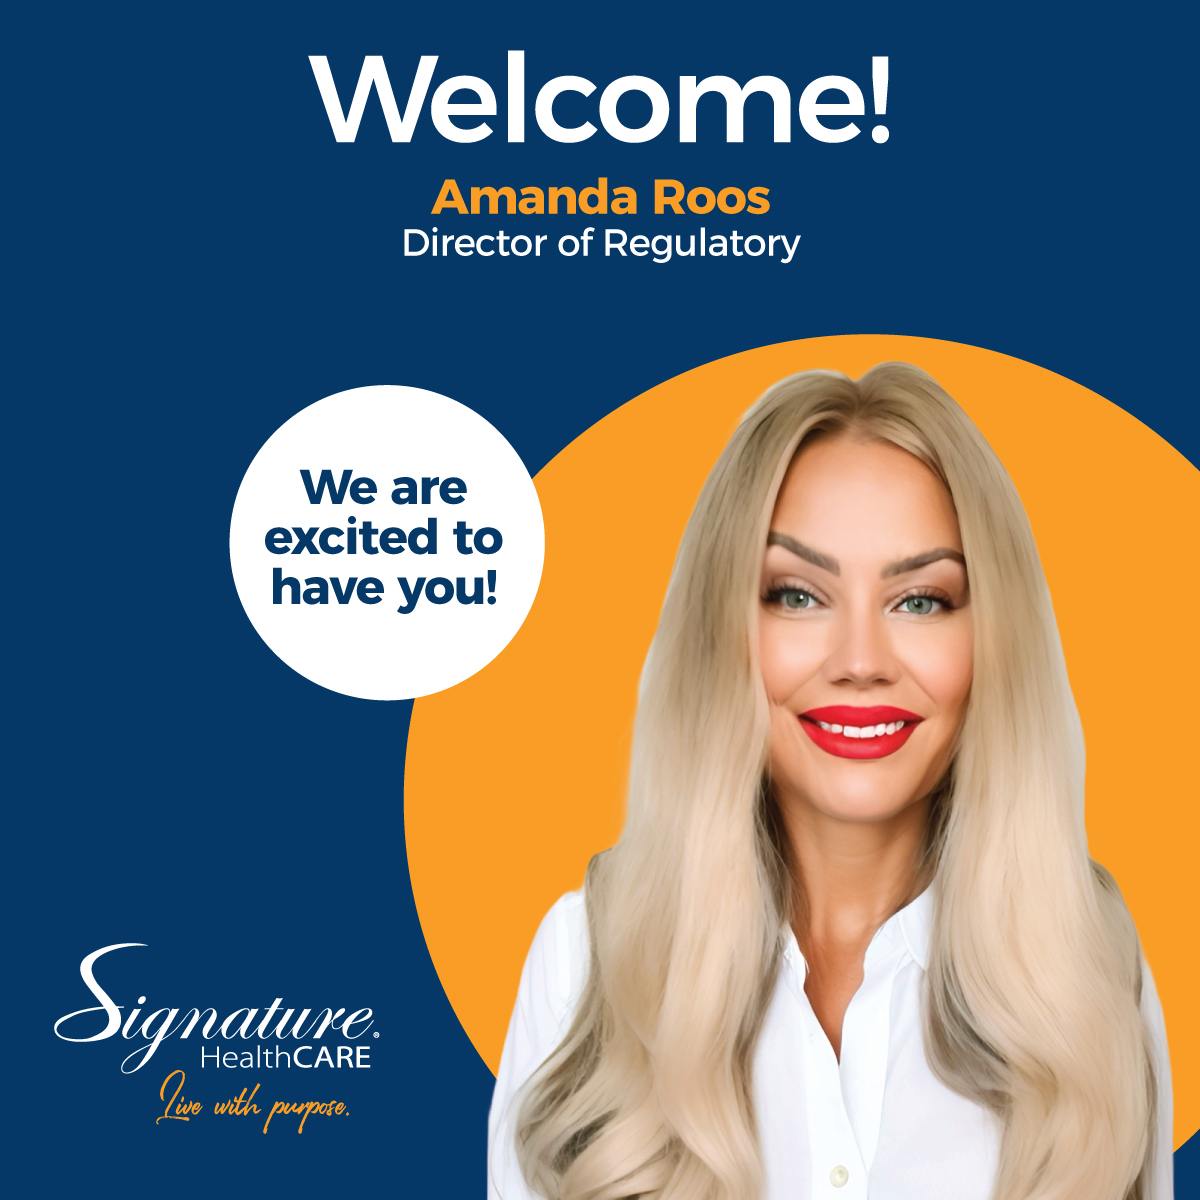 Join us in welcoming Amanda Roos to the Signature HealthCARE family! We're thrilled to have you on board and can't wait to see the incredible impact you'll make. #JoinTheRevolution #SignatureRevolution